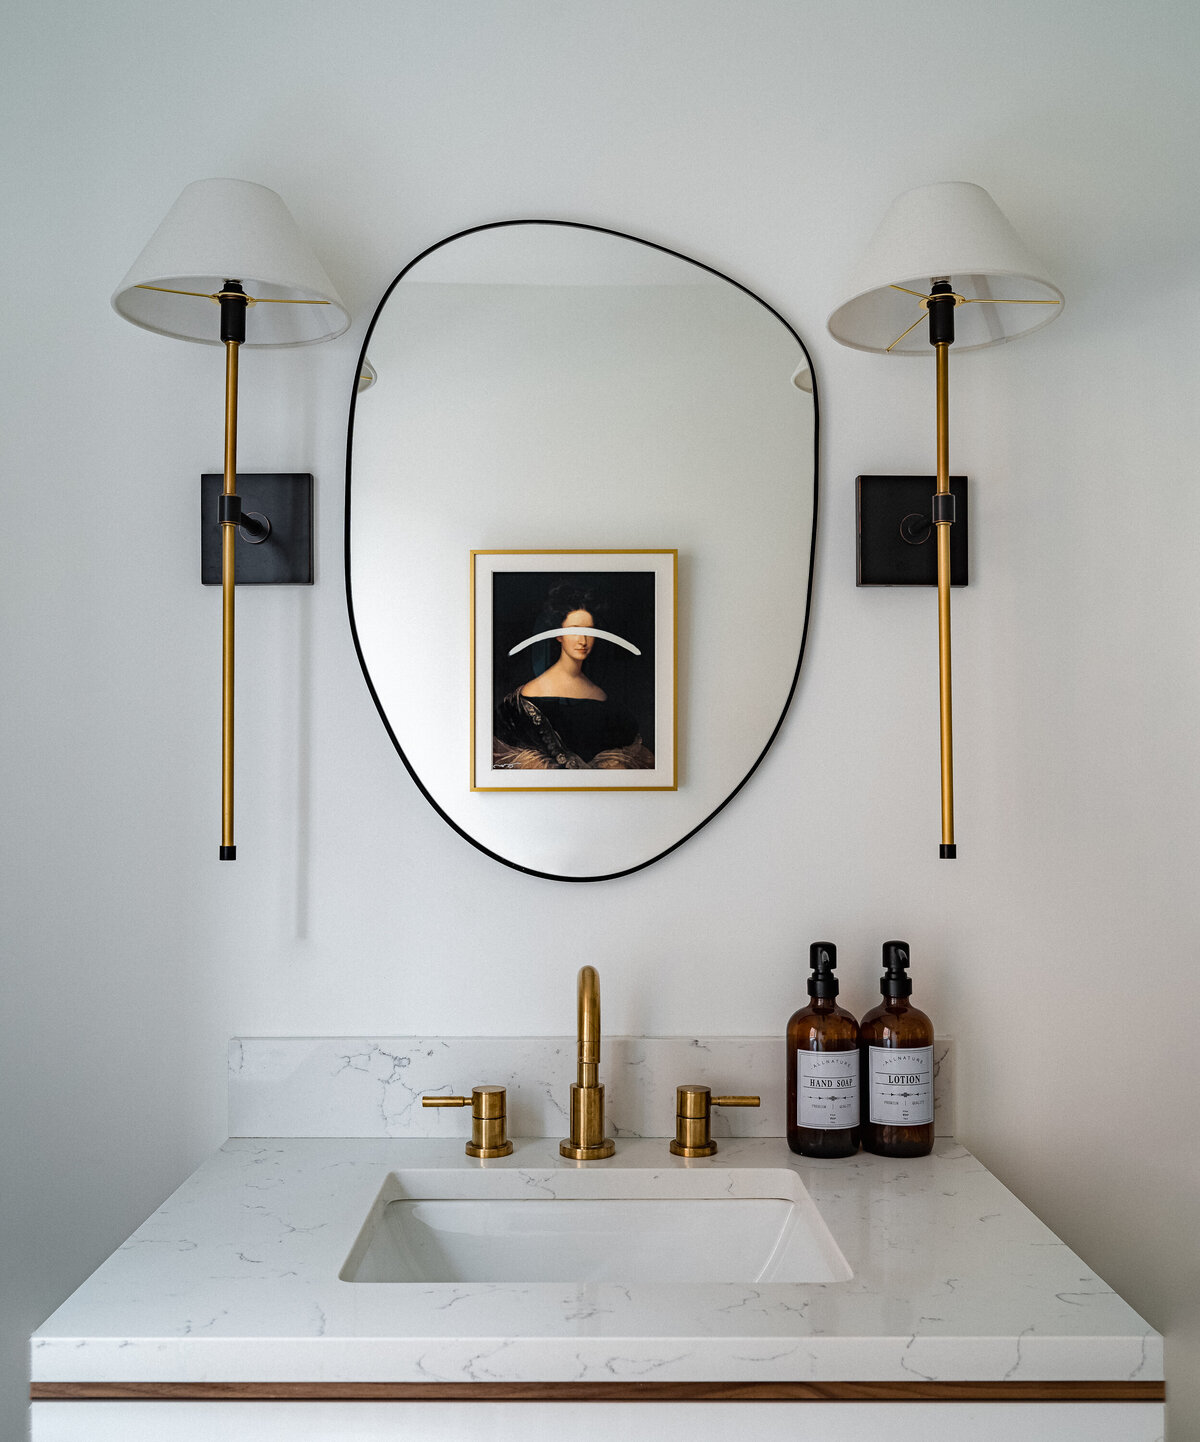 powder room with cvintage inspired artowrk, wall sconces and brass faucet